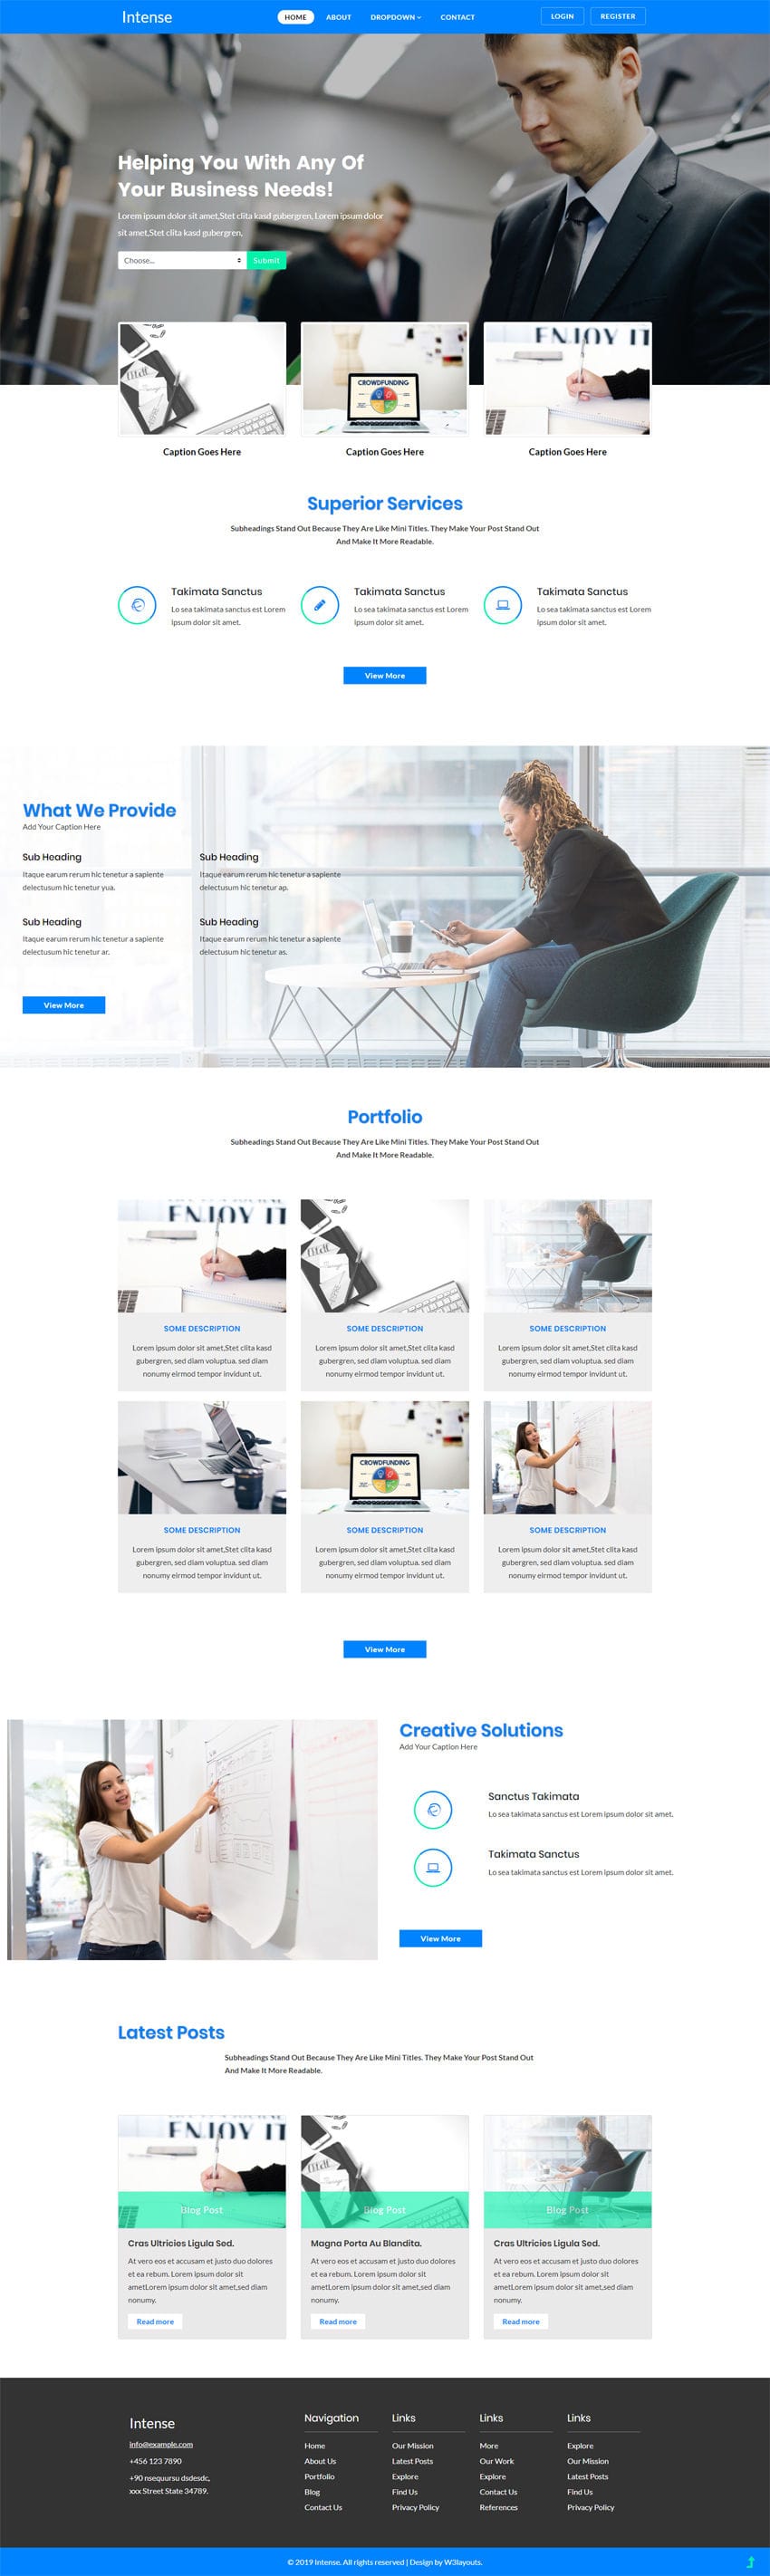 Intense - Business category Corporate website template for SMBs and Enterprises